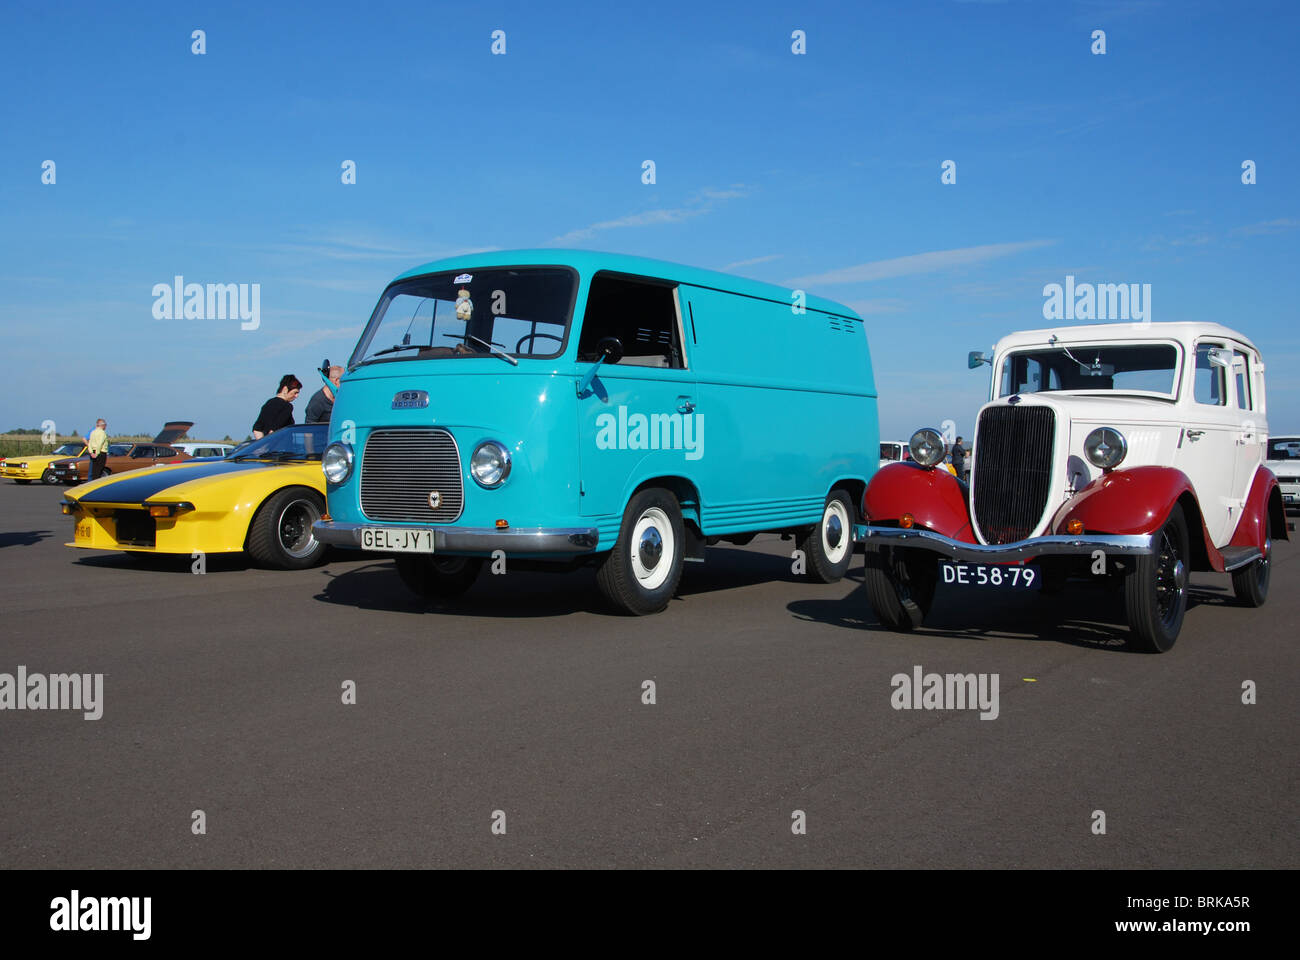 Ford cars from different eras on display, among them a German registered Ford Taunus utility van and a 1930s Ford Popular Stock Photo